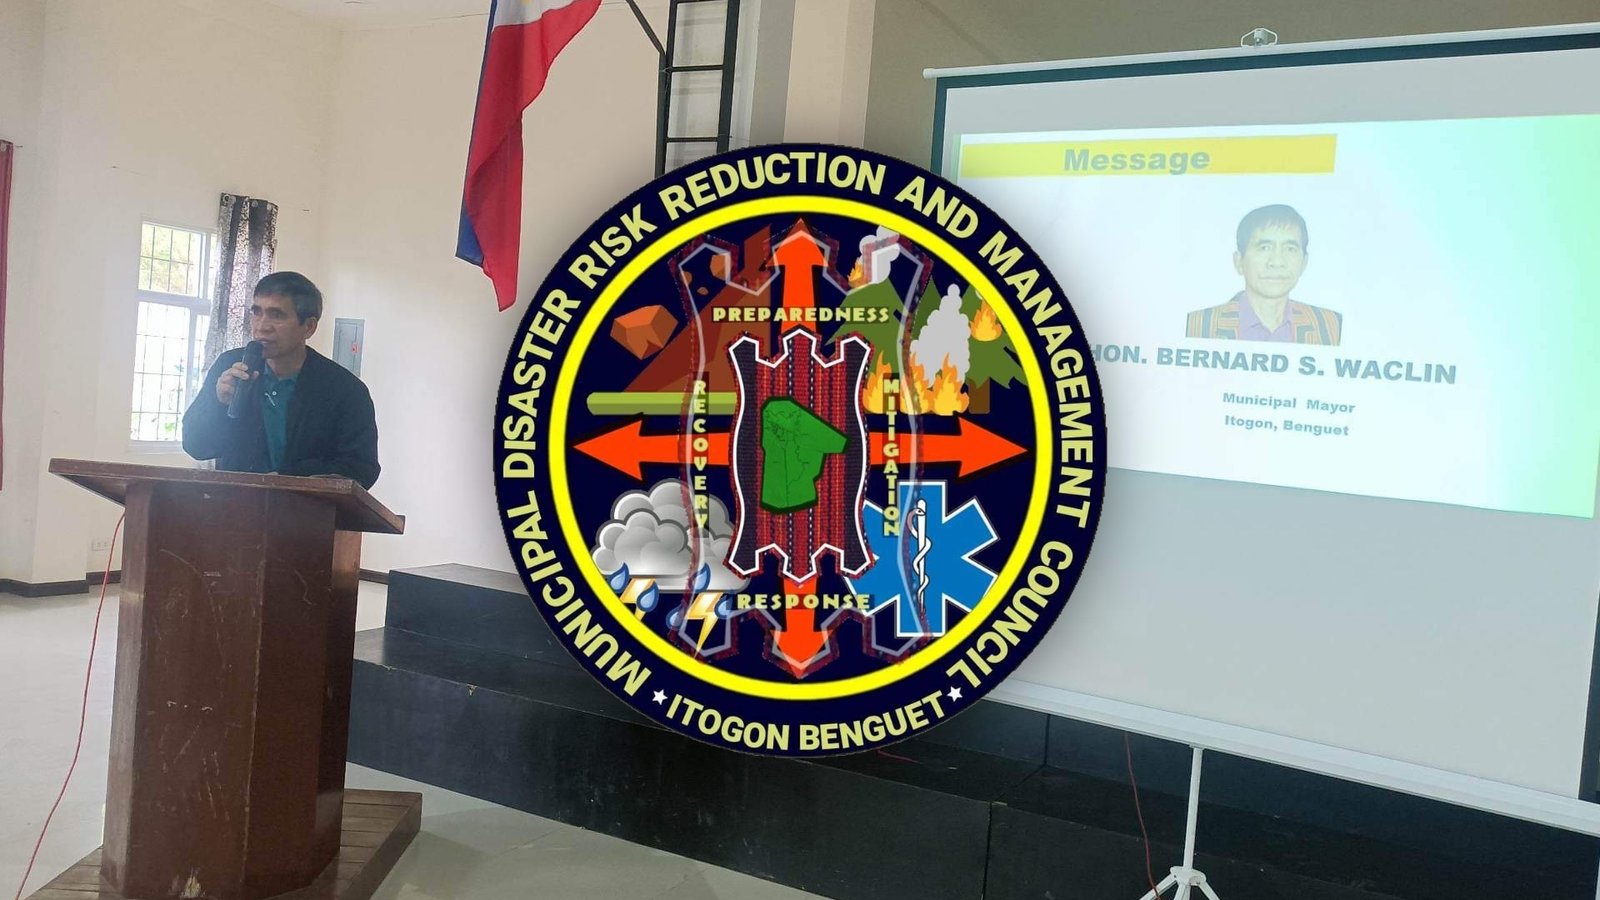 Municipal Officials, Employees, and Head Agencies Orient on Disaster Responsibilities